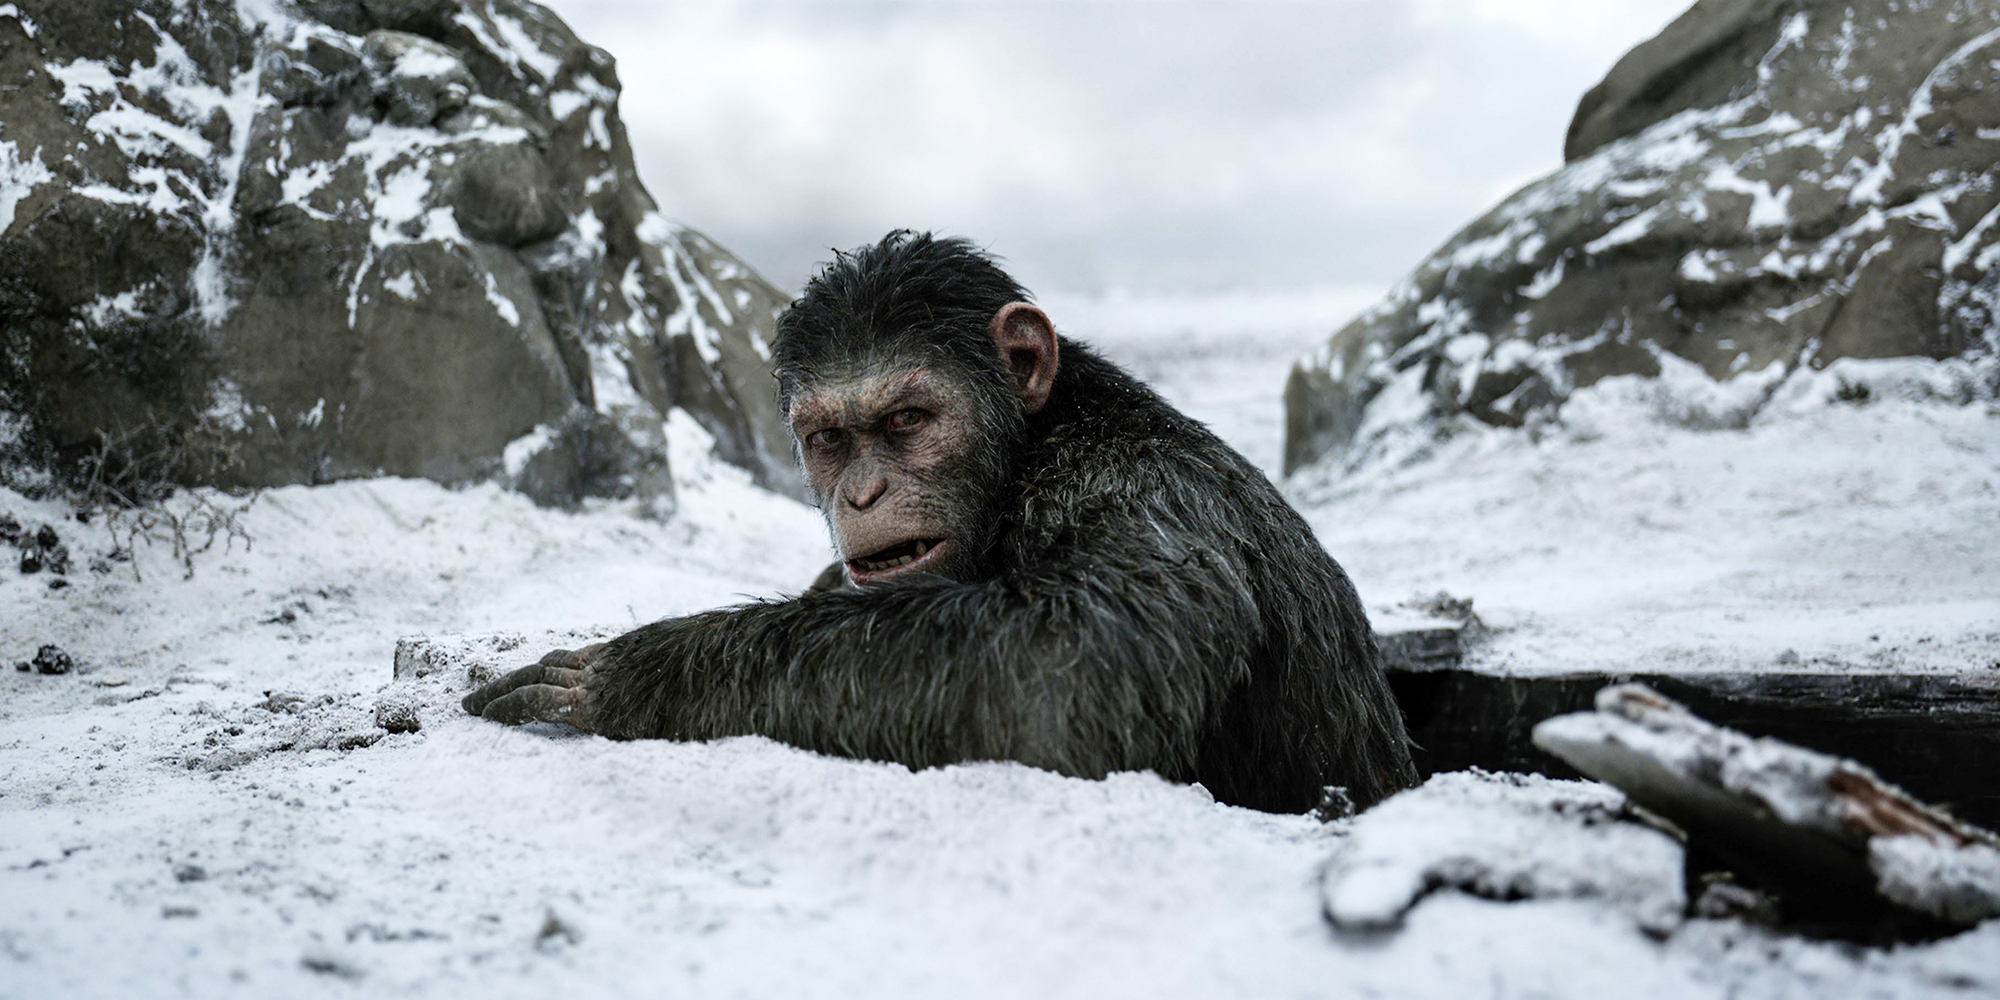 Film Review - War For the Planet of the Apes